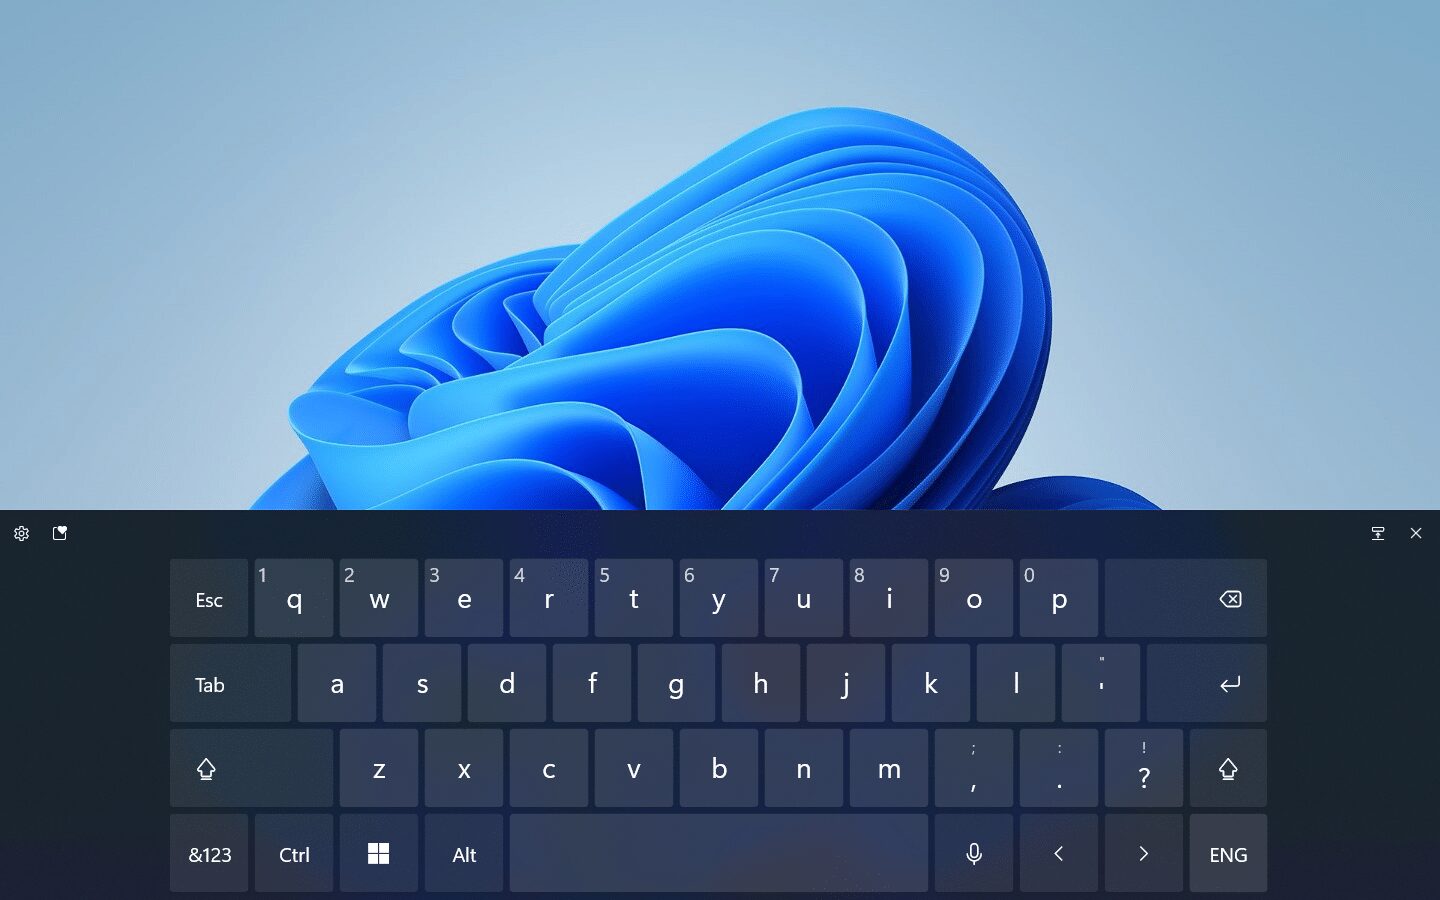 How to Add Touch Keyboard to Taskbar in Windows 11? - The Microsoft ...